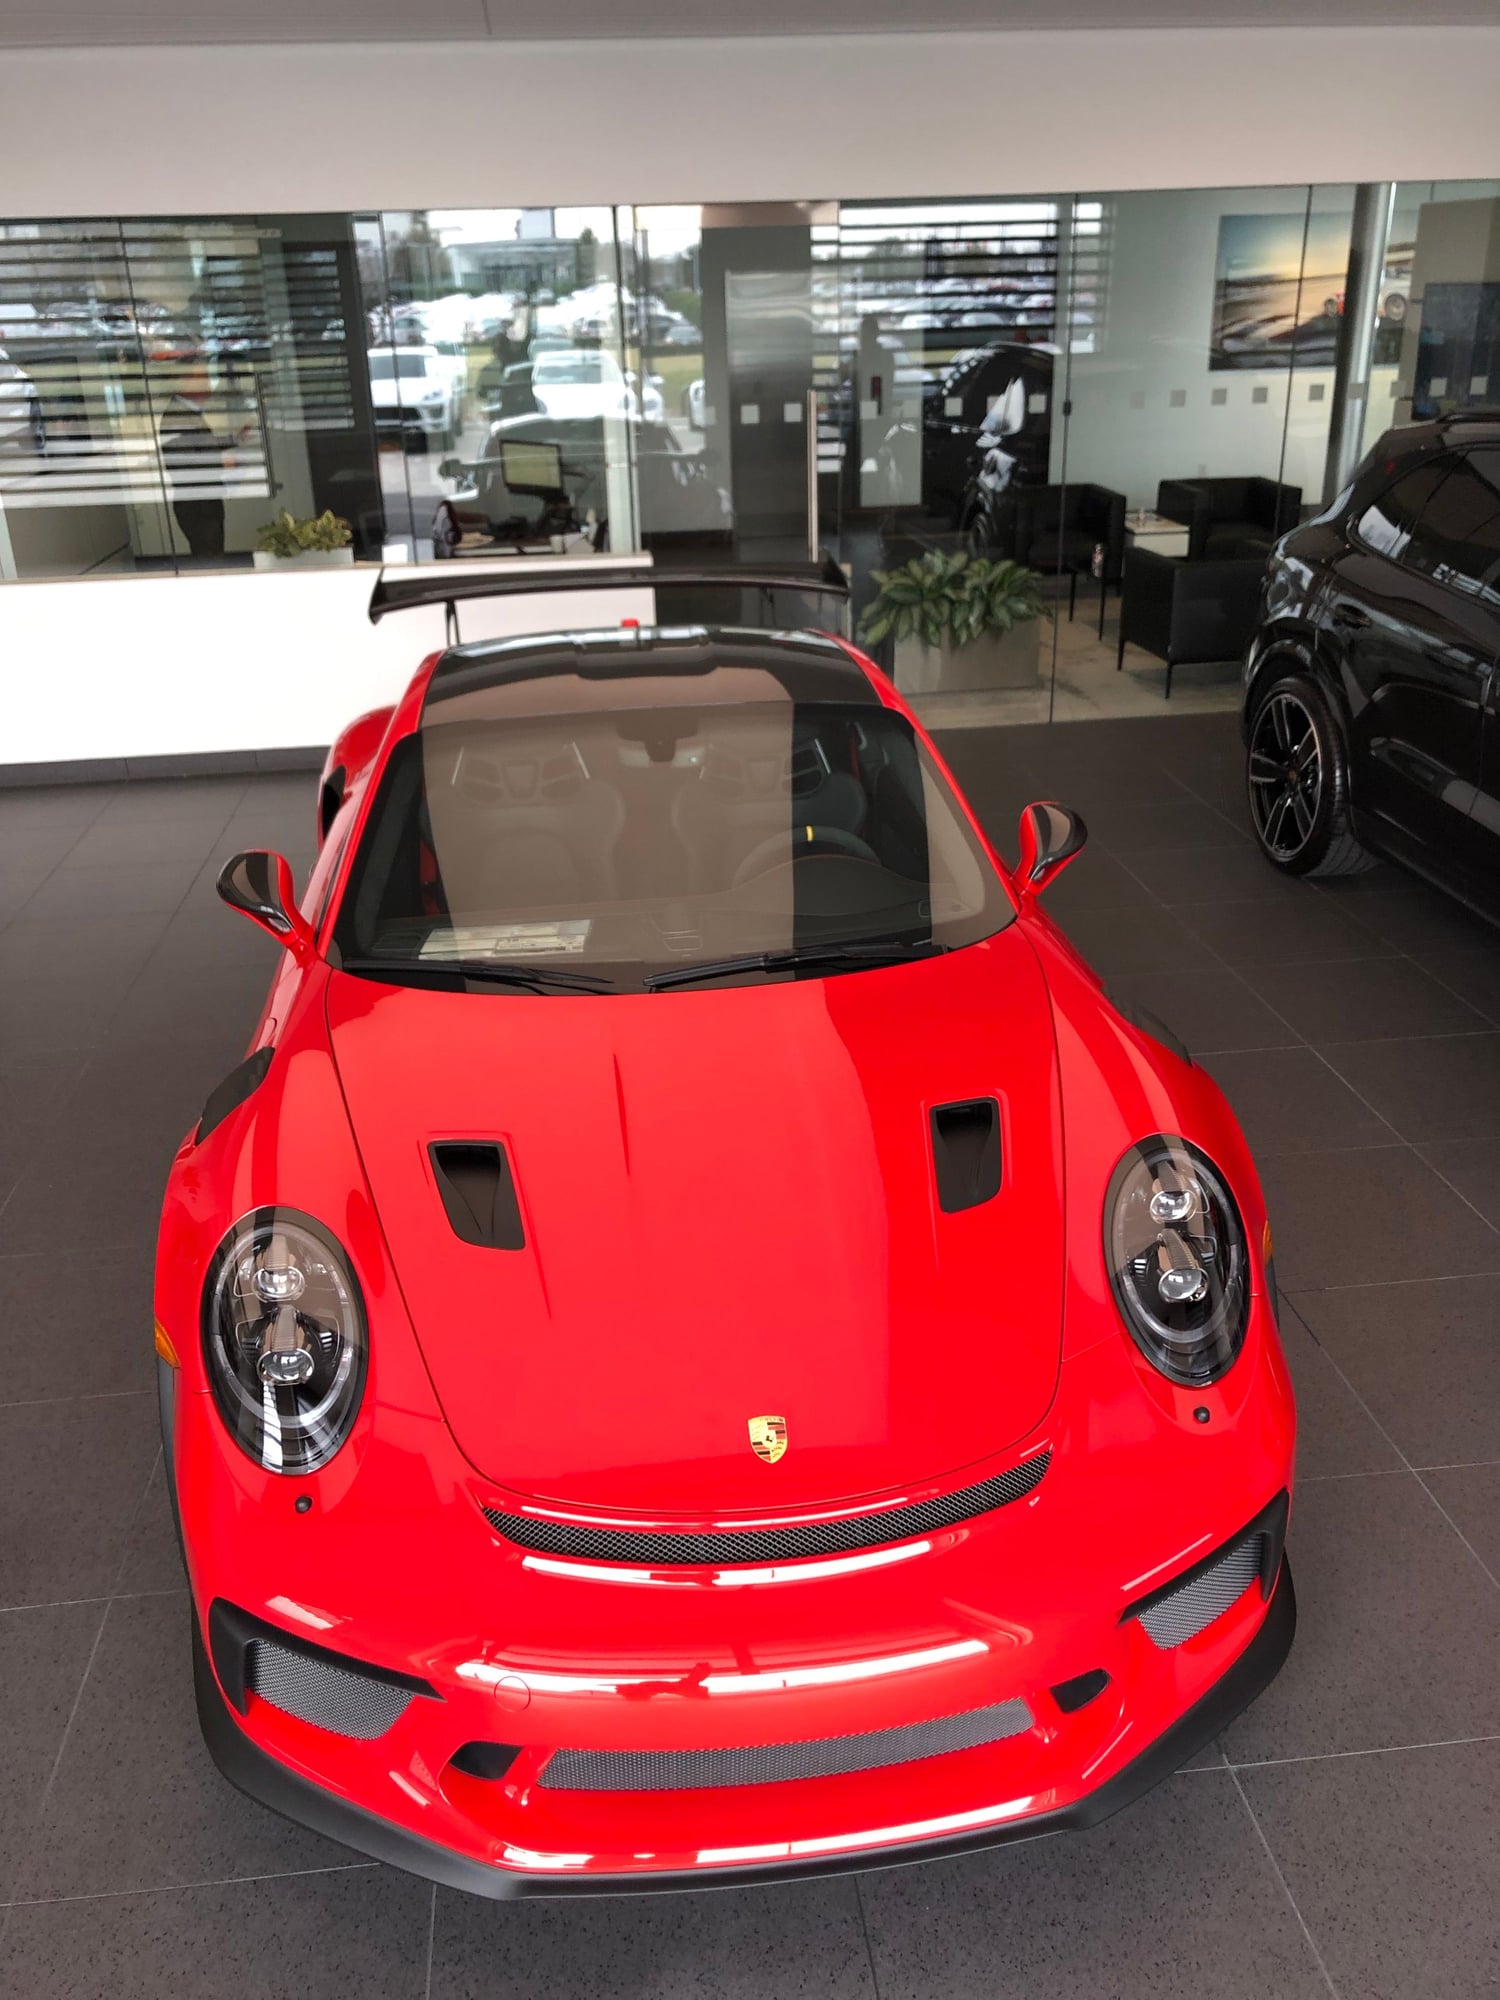 2019 Porsche GT3 - 2019 Porsche GT3 RS Weissach - Used - VIN WPOAF2A90KS165503 - 36 Miles - 6 cyl - 2WD - Automatic - Coupe - Red - Argyle, TX 76226, United States